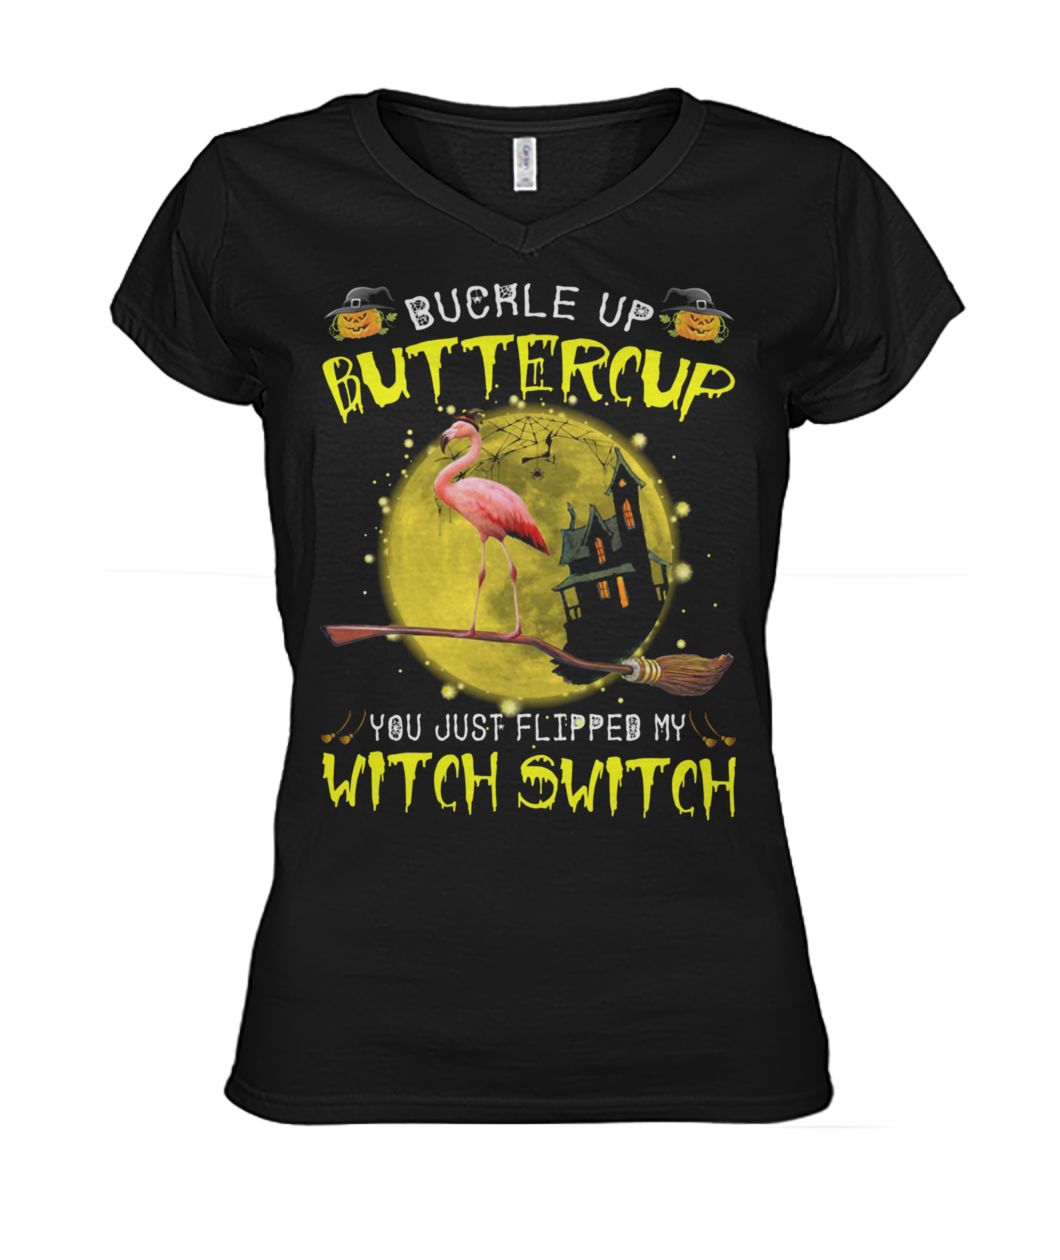 Buckle up buttercup you just flipped my witch switch flamingo women's v-neck